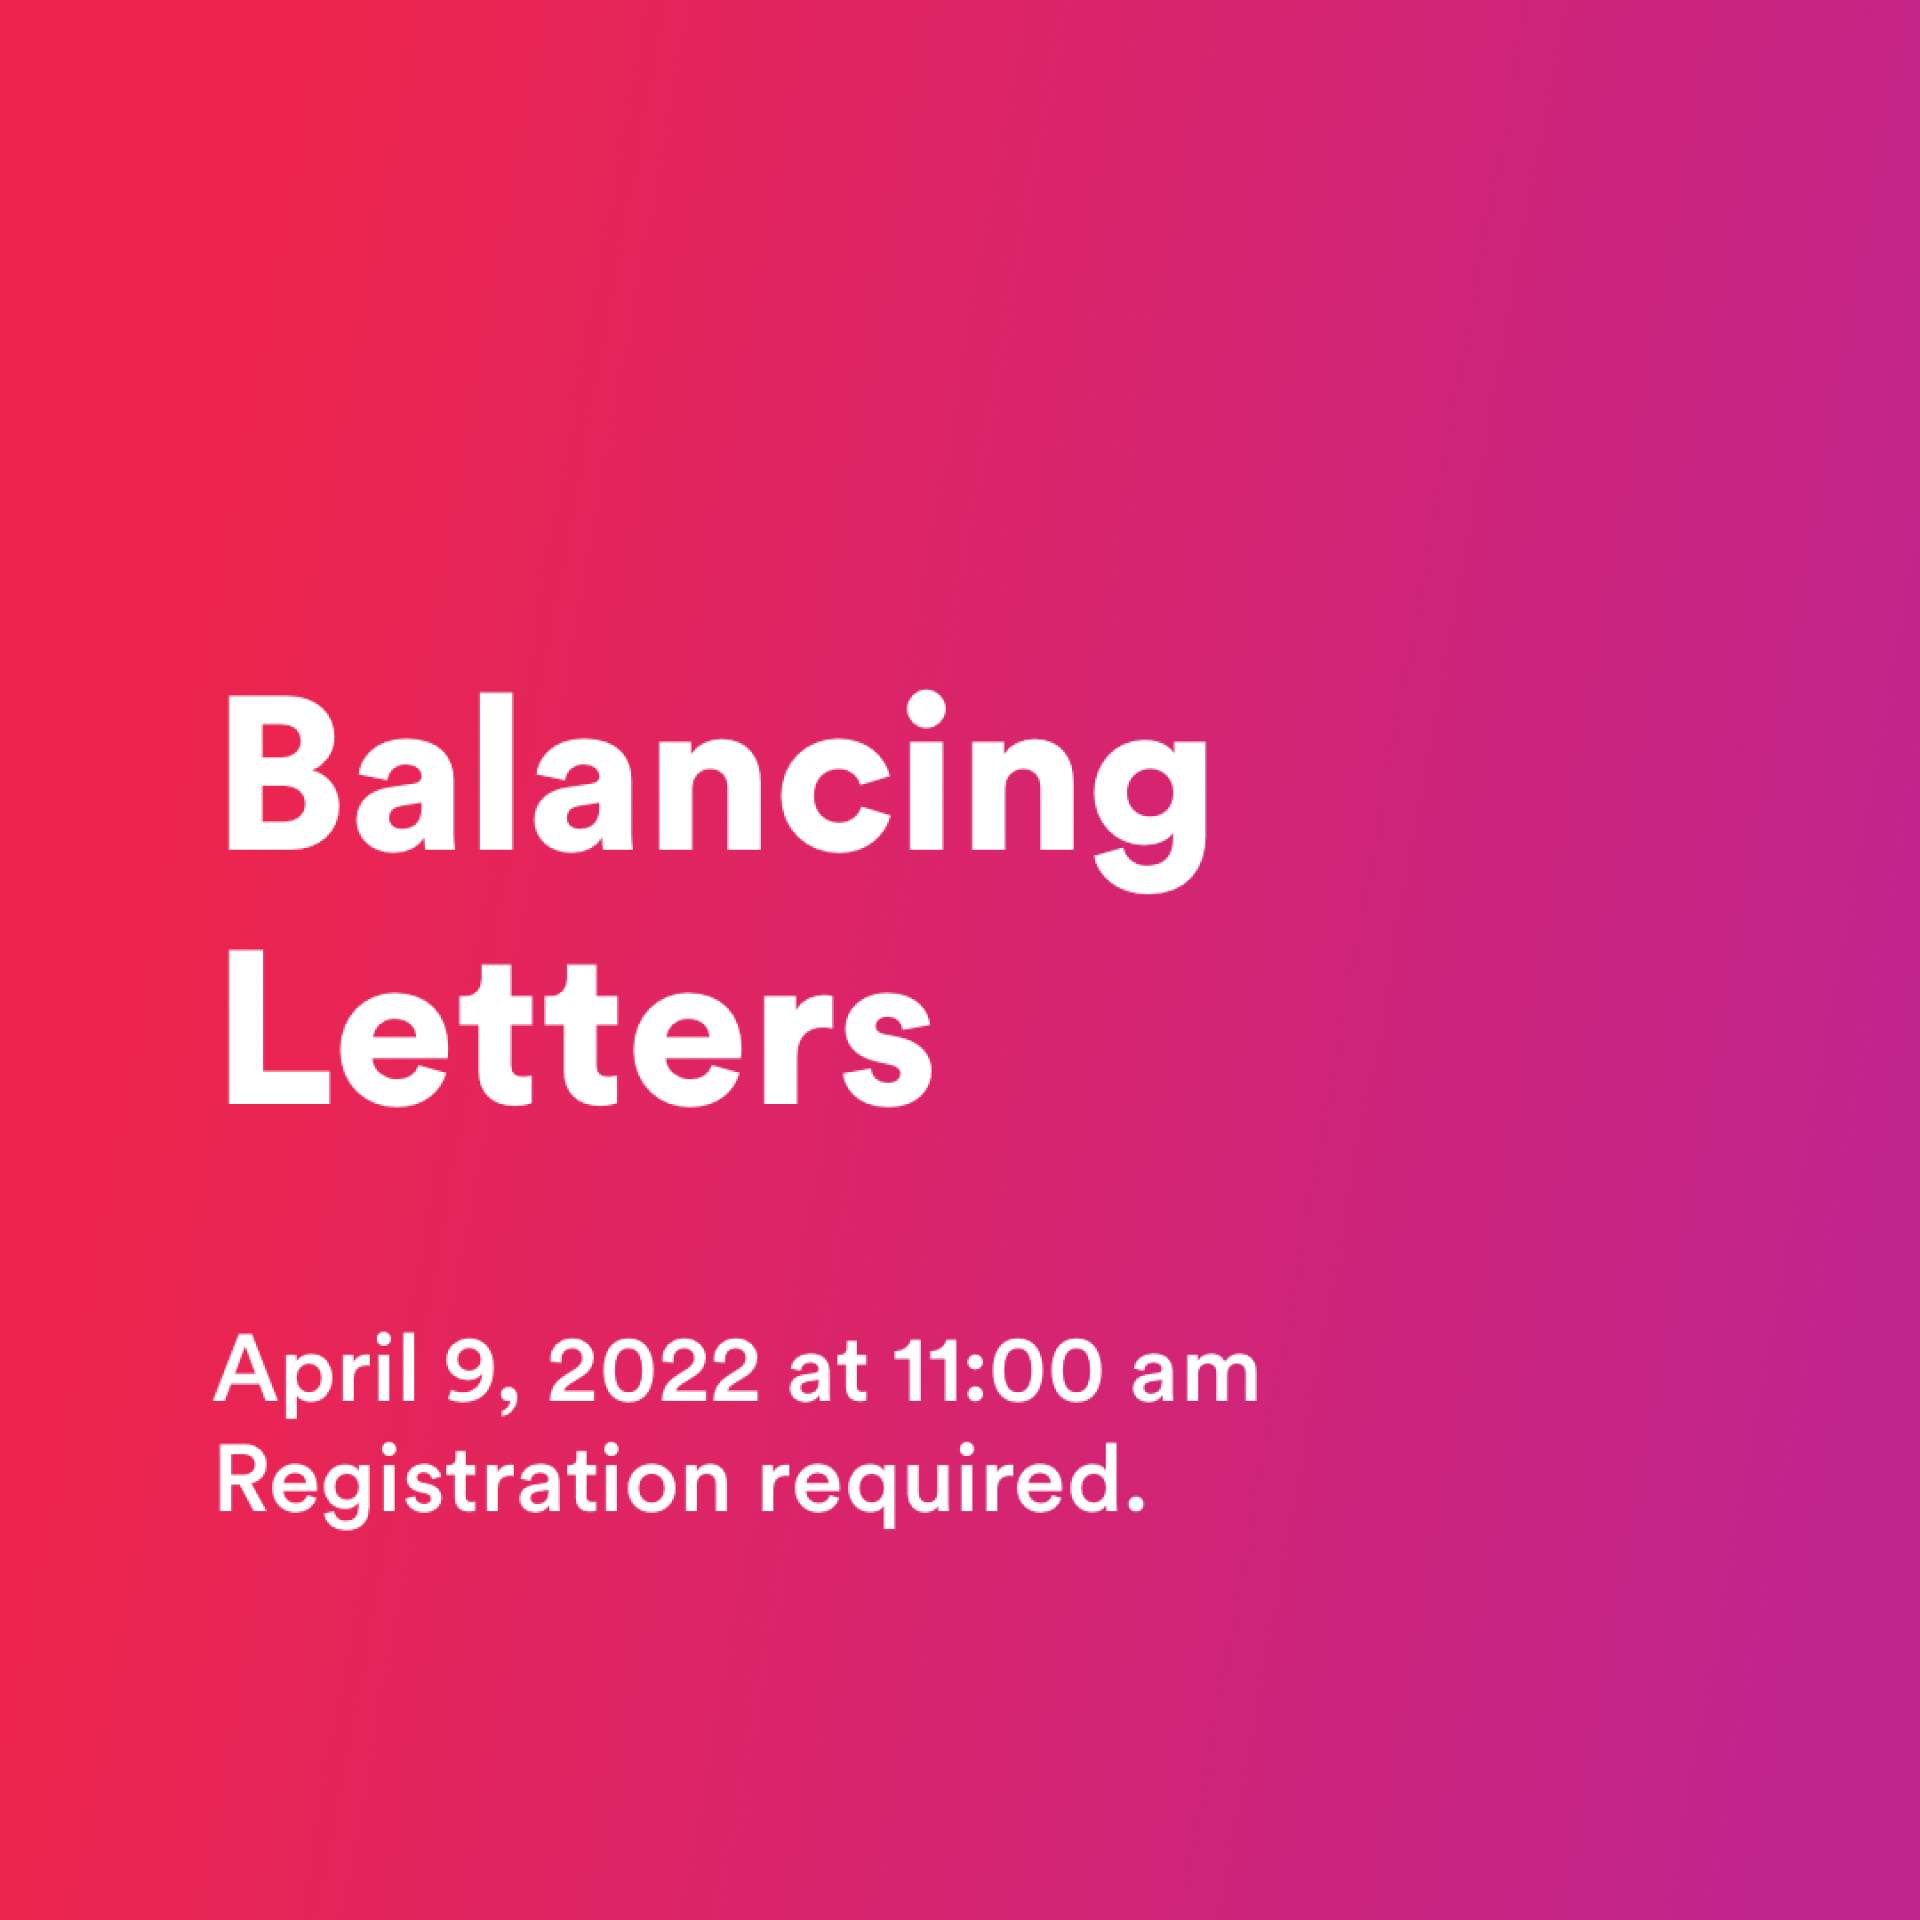 Balancing Letters